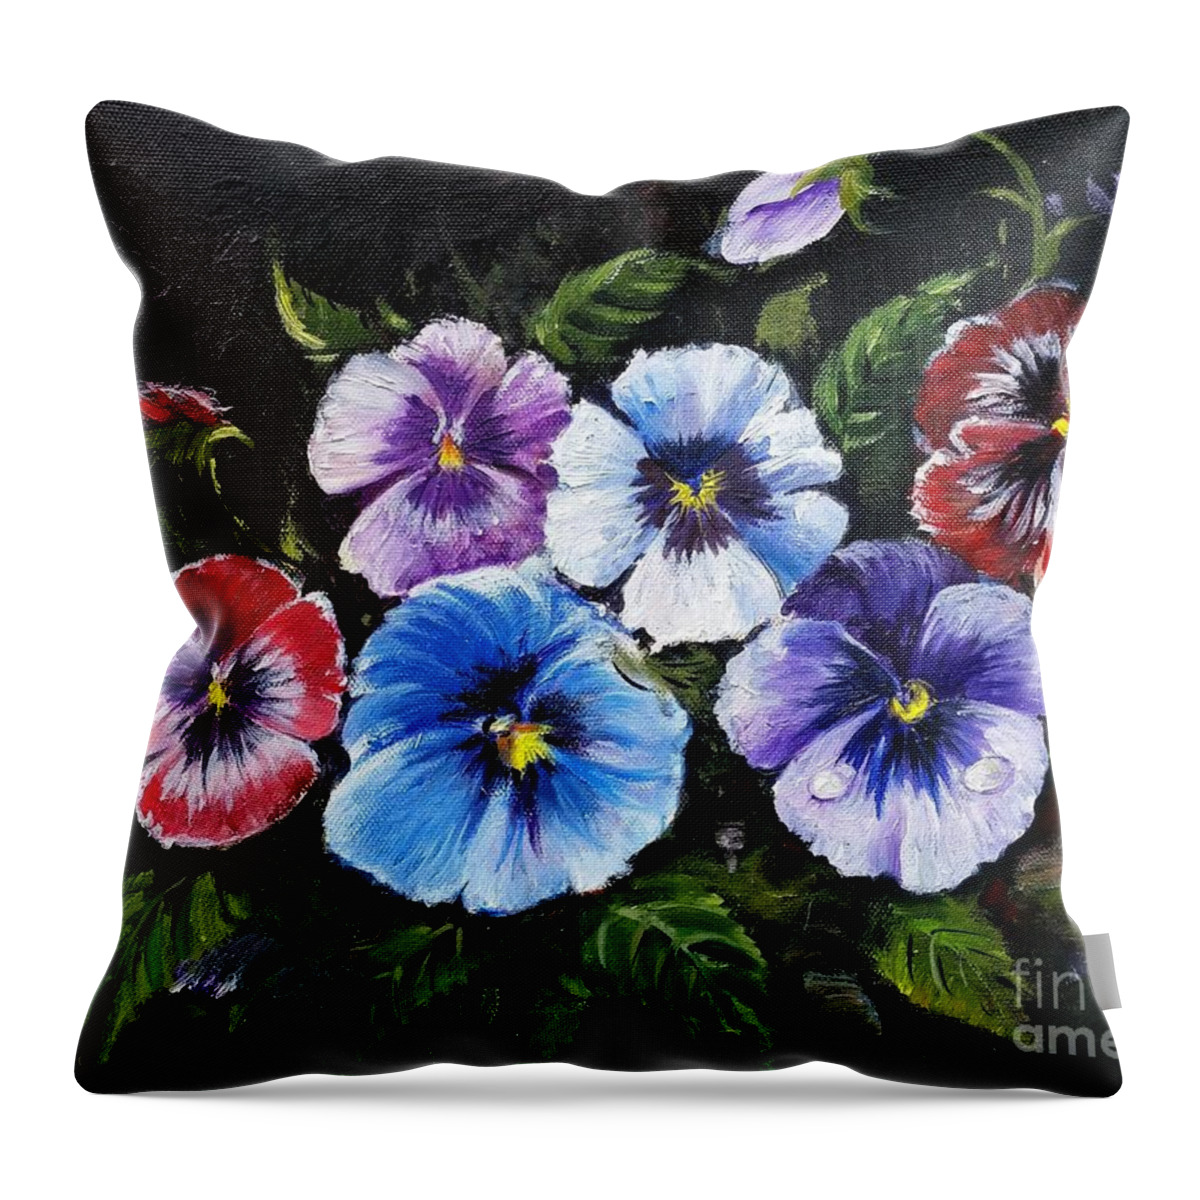 Pansies Flower Throw Pillow featuring the painting Pansies by Rose Wang